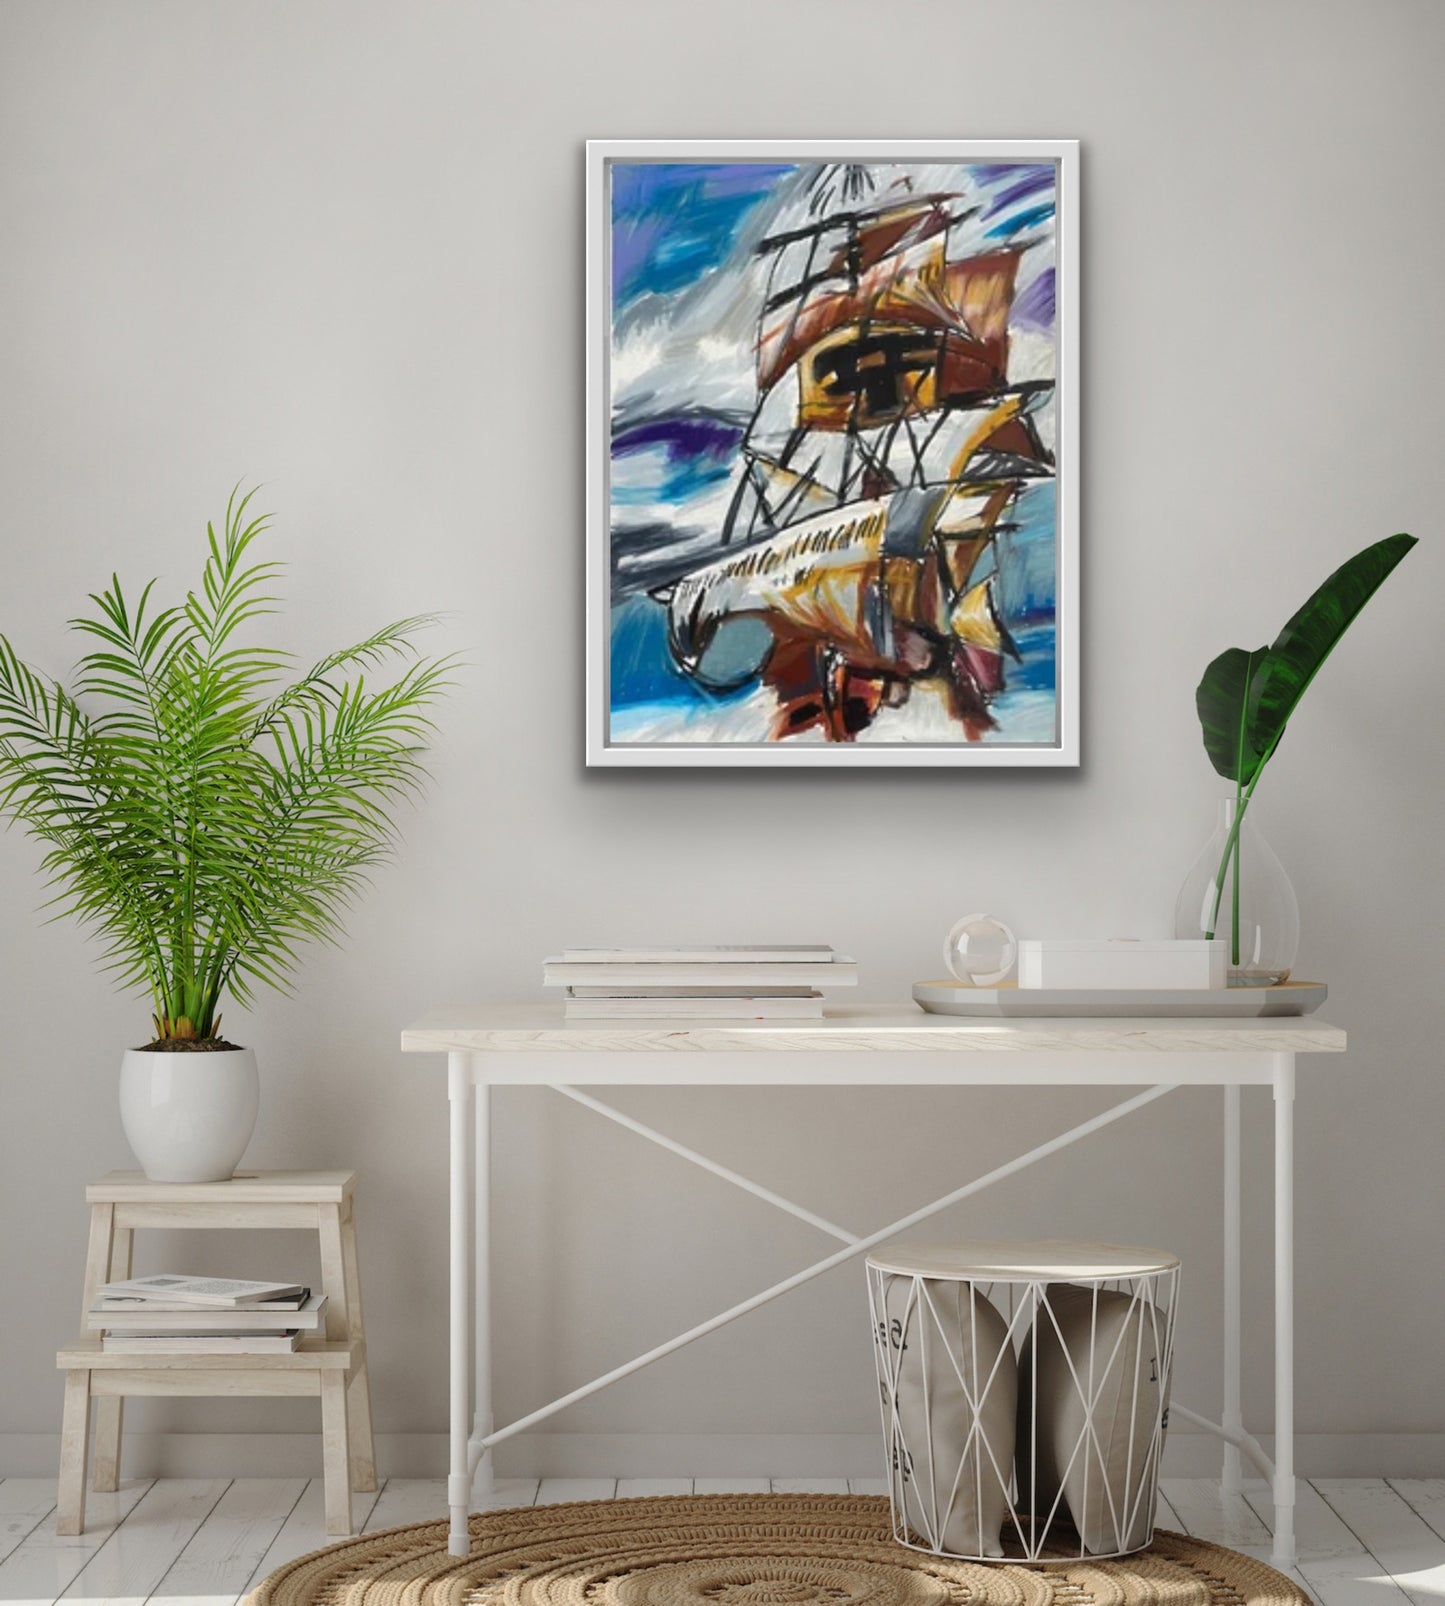 Pirate Ship - Stretched Canvas Print in more sizes